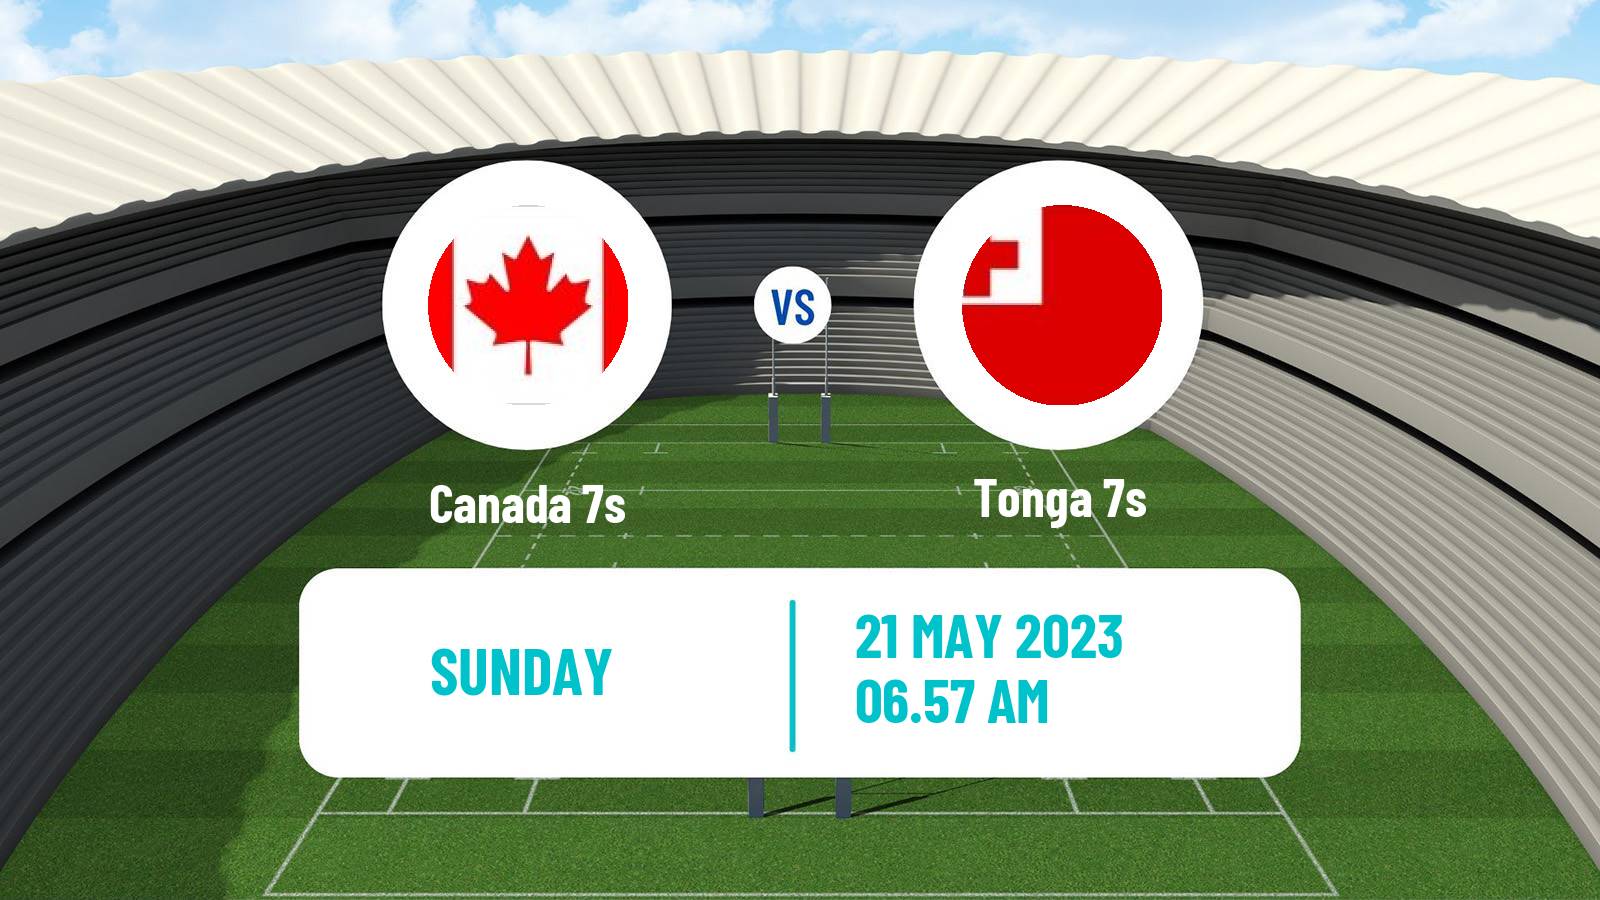 Rugby union Sevens World Series - England Canada 7s - Tonga 7s